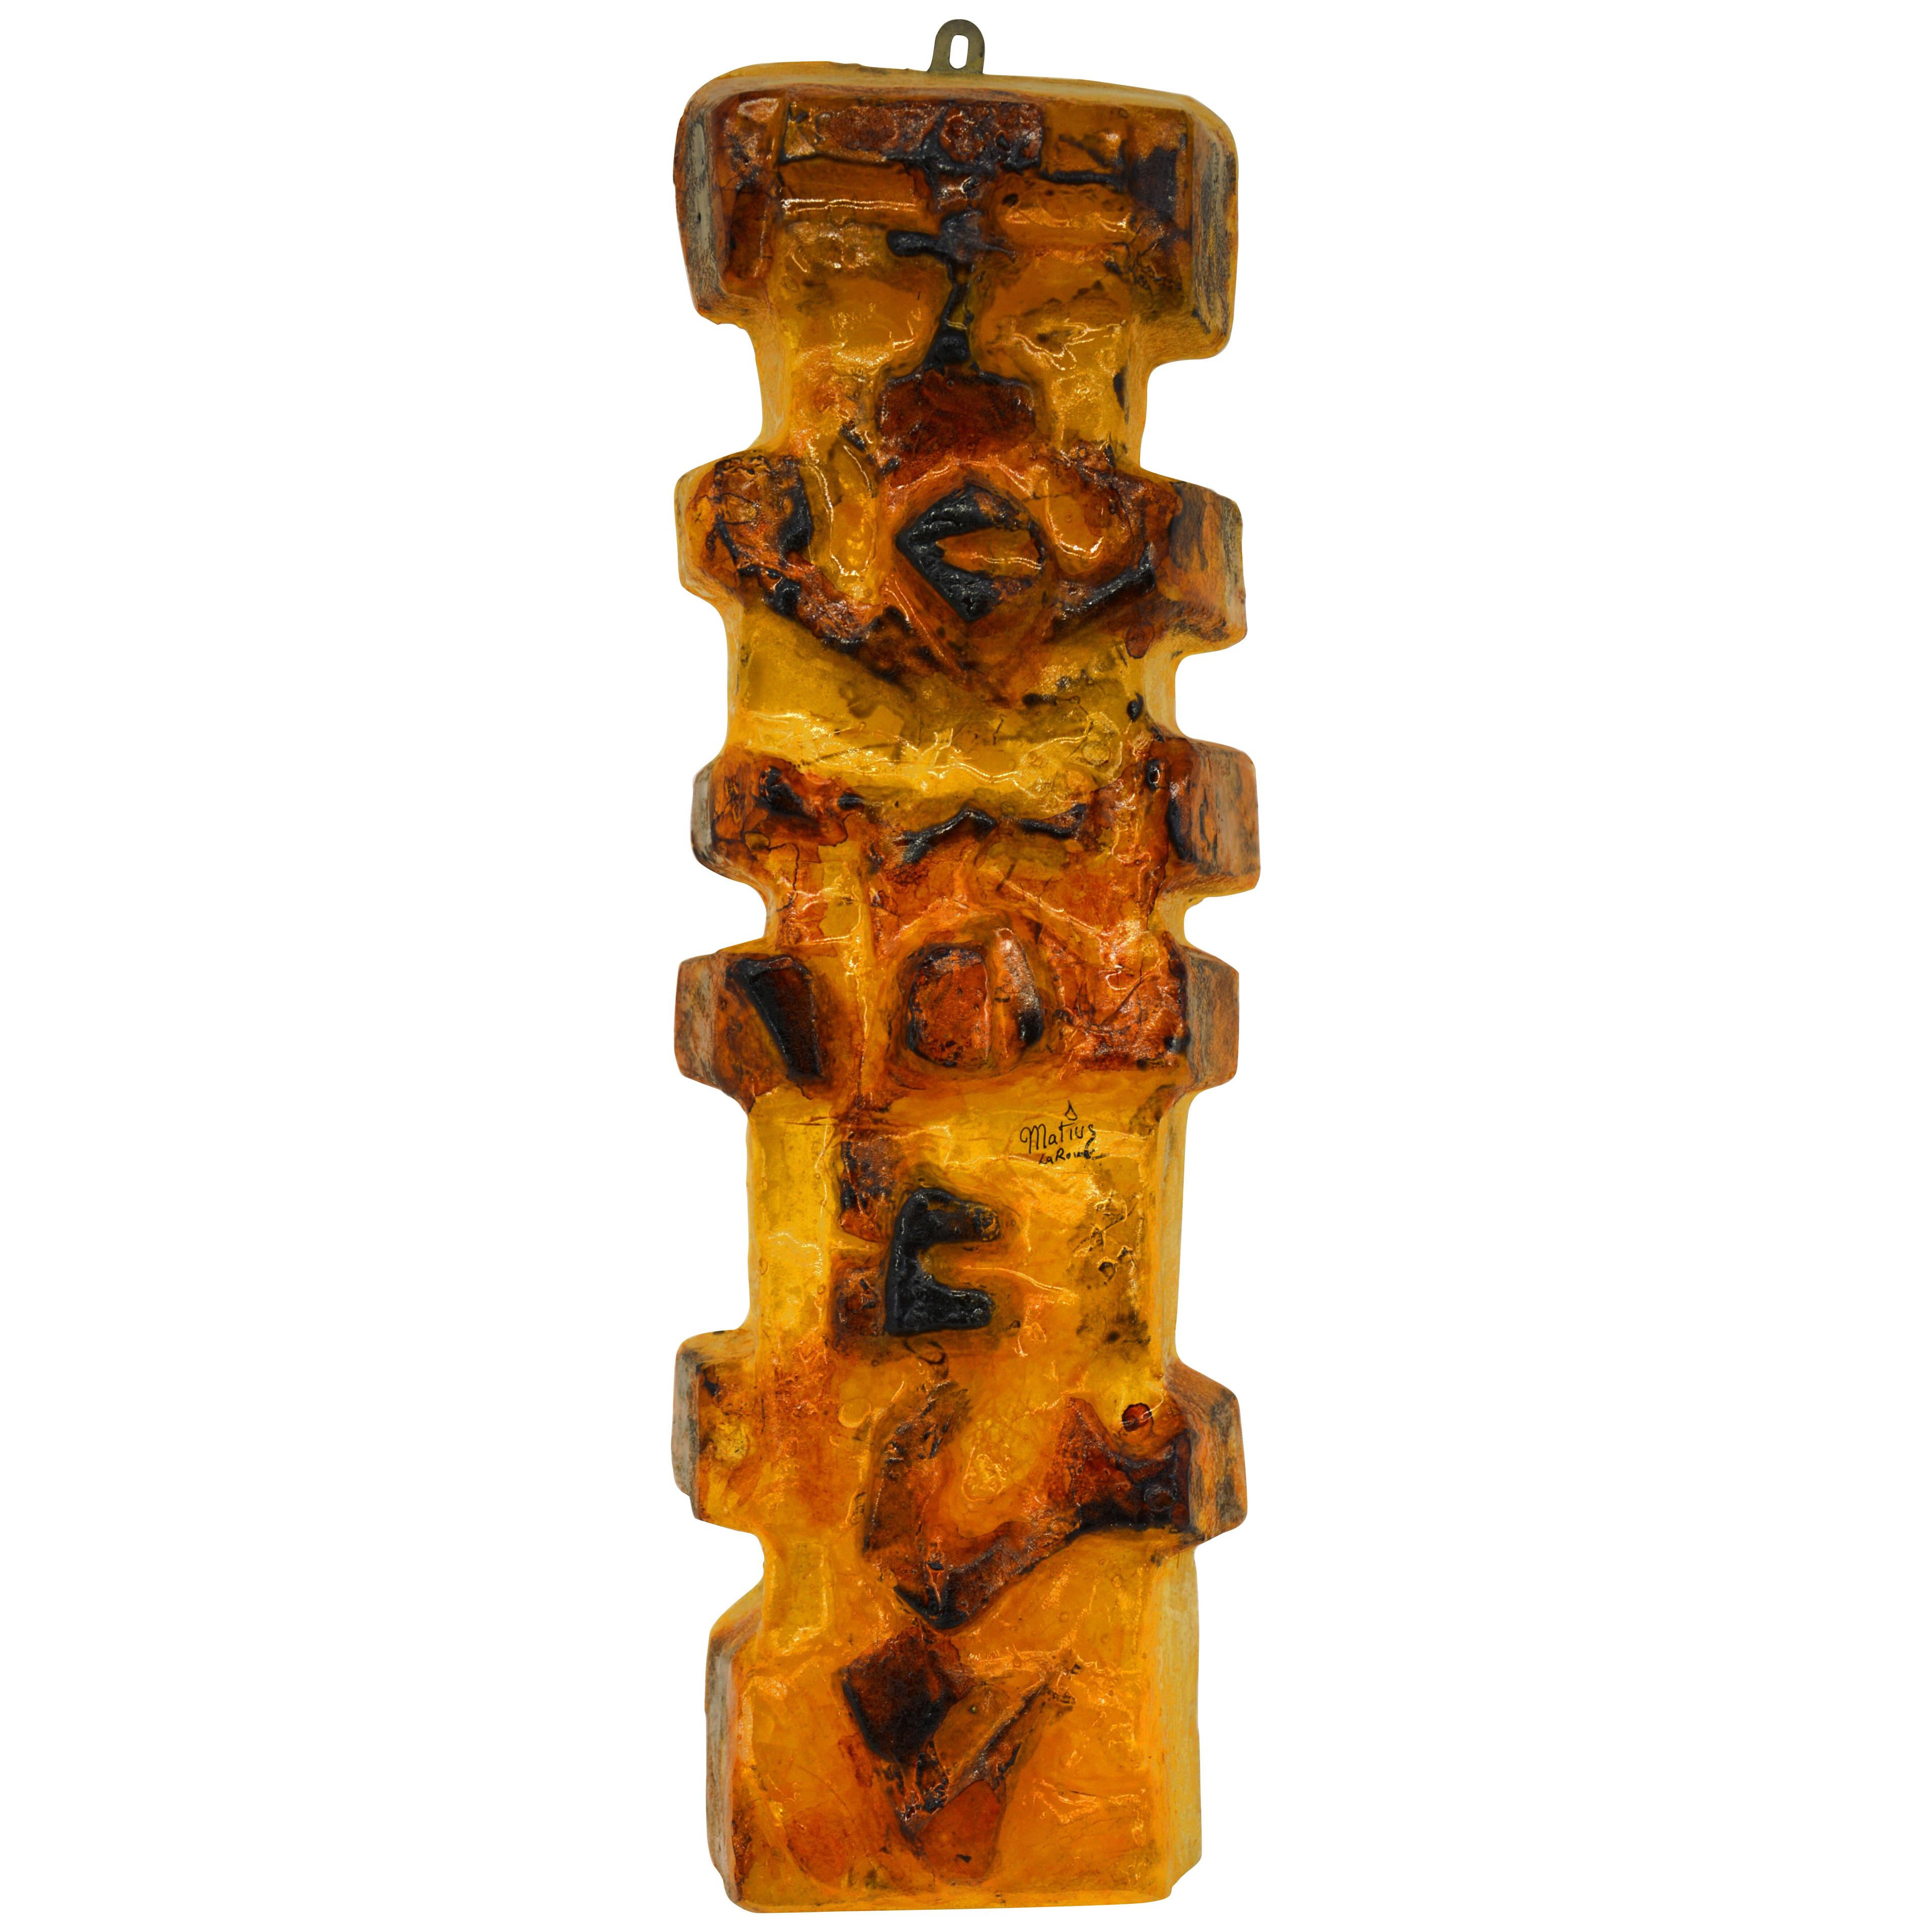 Matius French Vintage Pop Art Mural TOTEM Wall Sconce Sculpture, 1970s